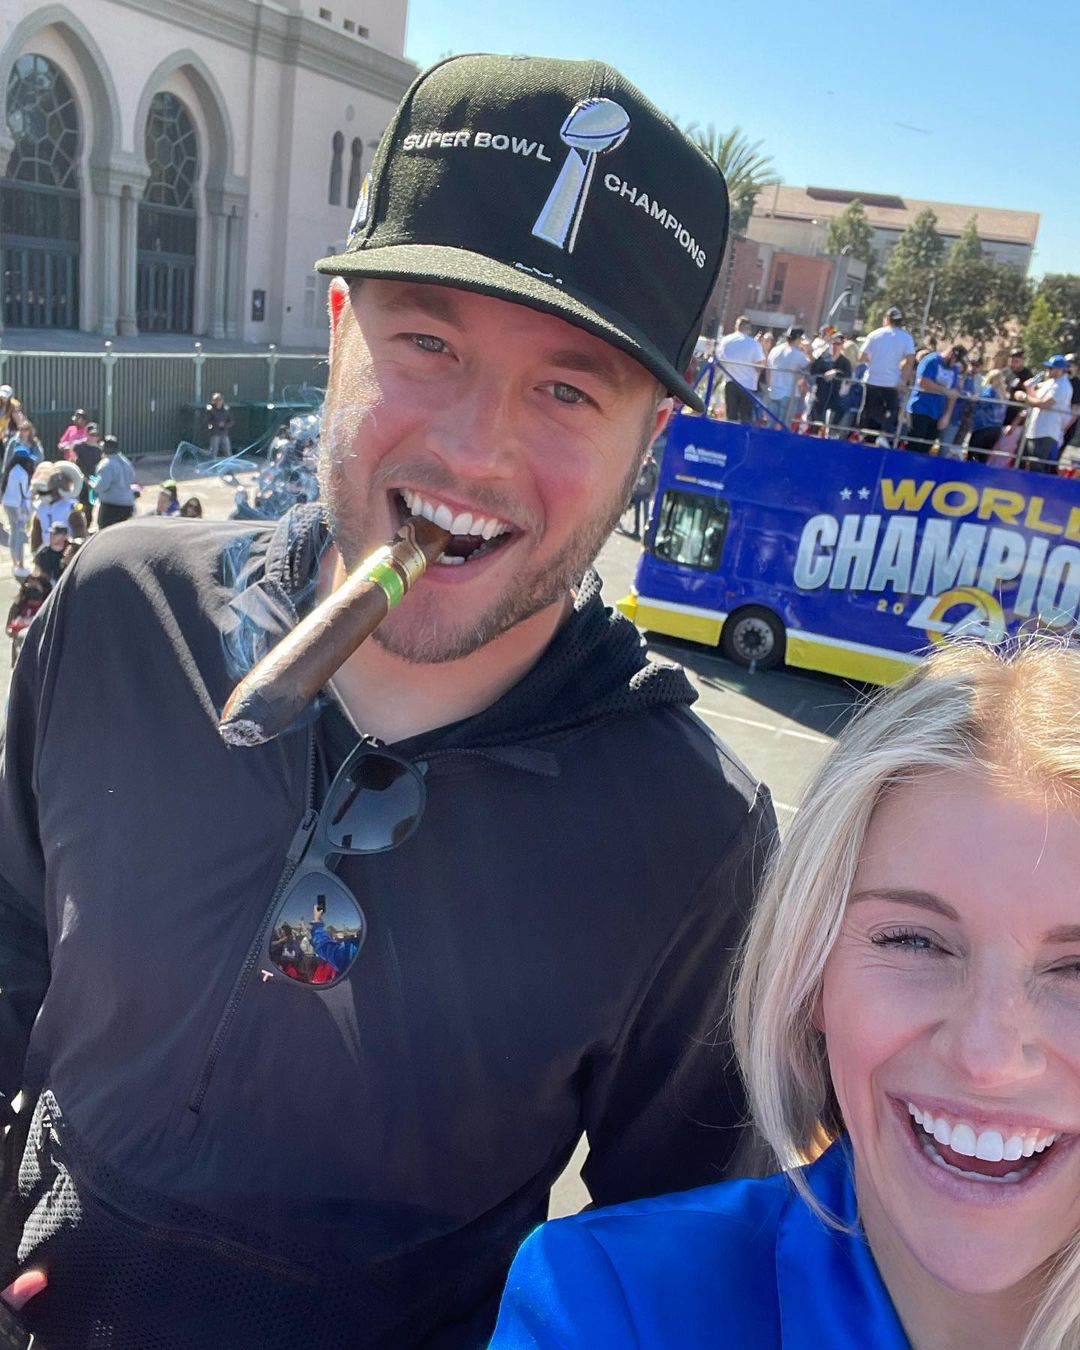 Matthew Stafford on photographer's fall at Super Bowl parade: 'Wish I had a  better reaction in the moment